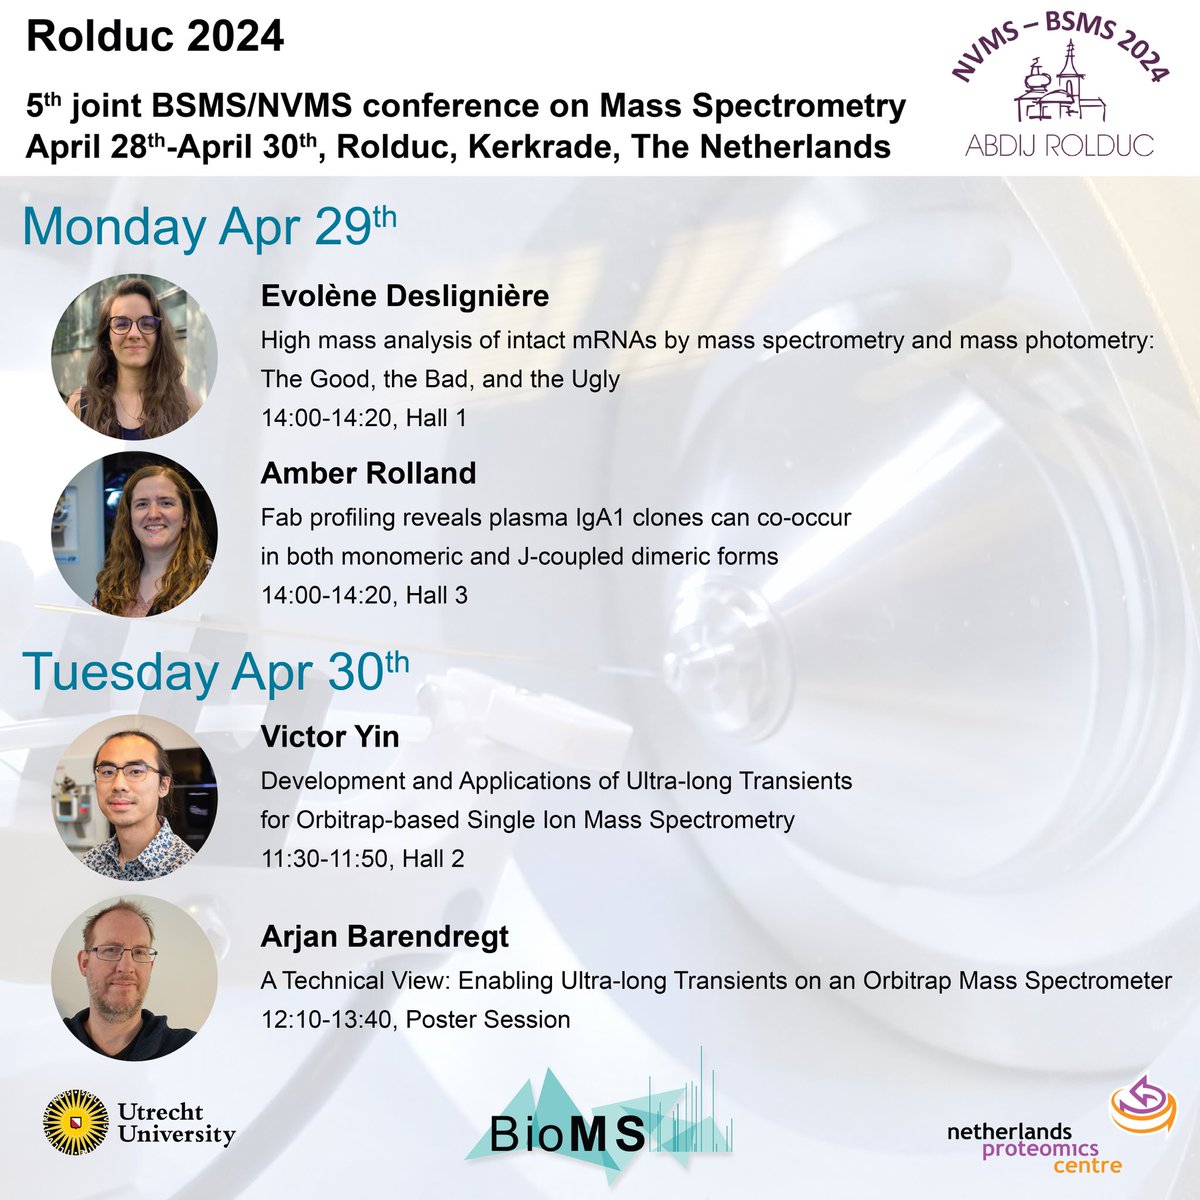 Would you like to hear more about our research? Evolène (@Evolene_D), Amber (@inthegasphase), Victor (@realvictoryin_) and Arjan will be presenting at Rolduc 2024, talking about their most recent results and publications. Looking forward to meeting many of you there!